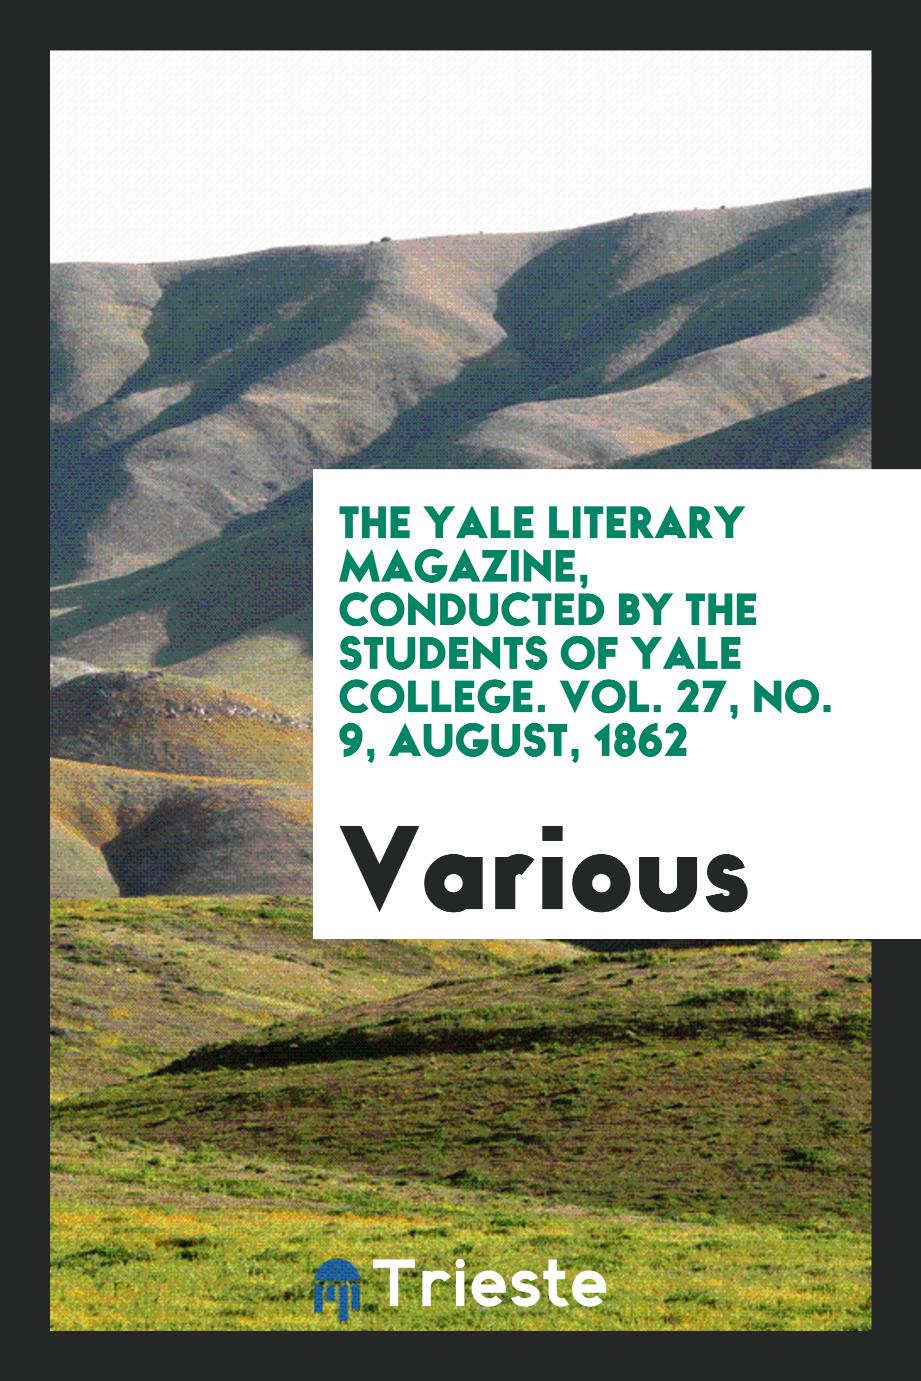 The Yale literary magazine, conducted by the students of Yale College. Vol. 27, No. 9, August, 1862